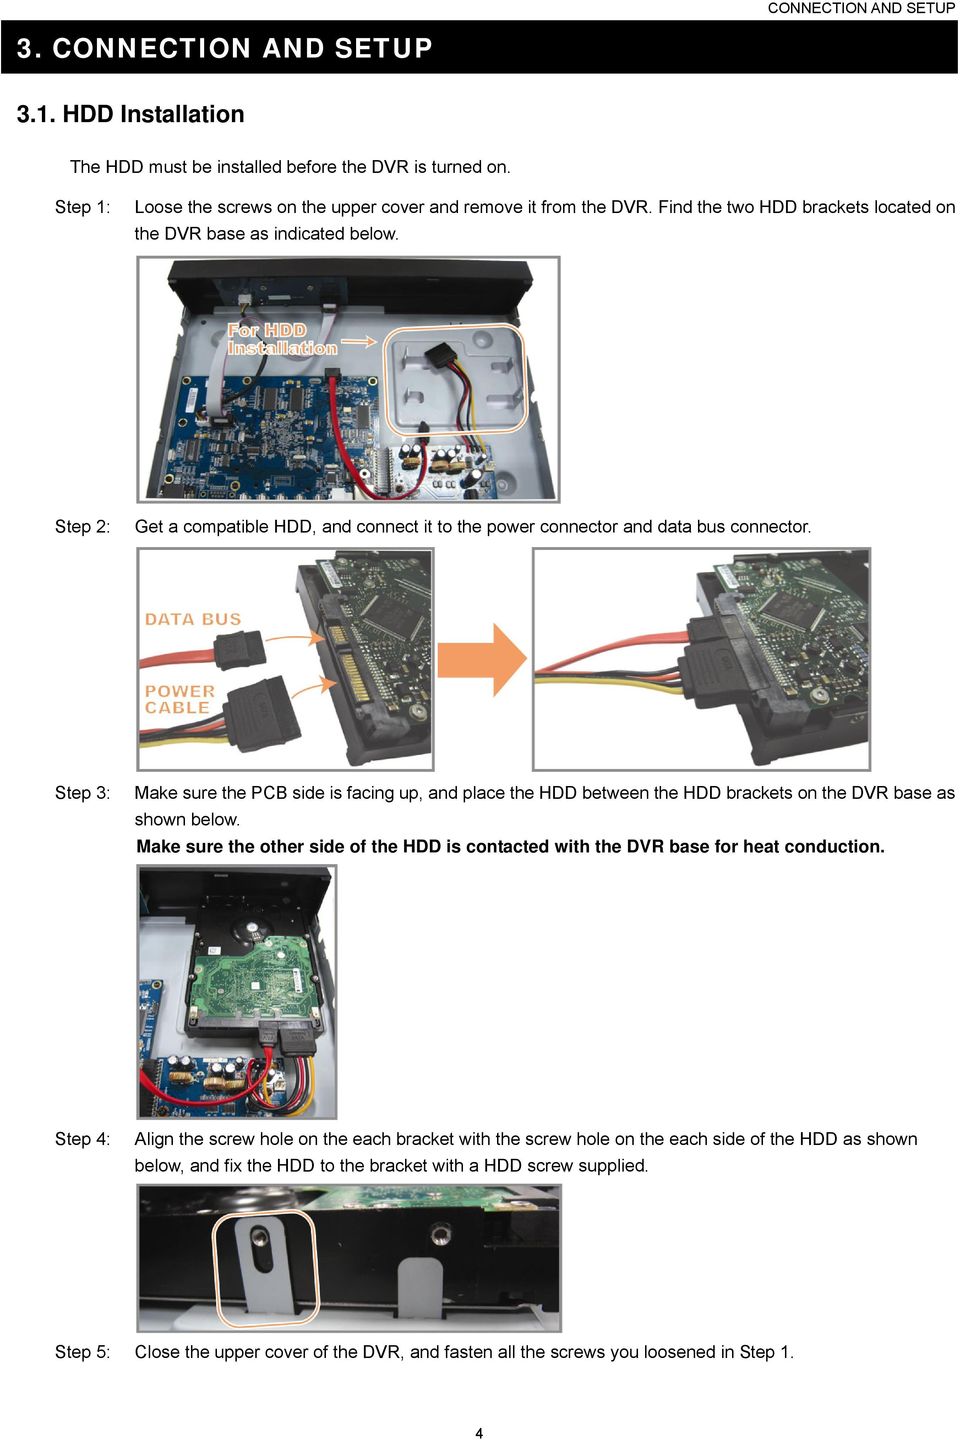 Step 3: Make sure the PCB side is facing up, and place the HDD between the HDD brackets on the DVR base as shown below.